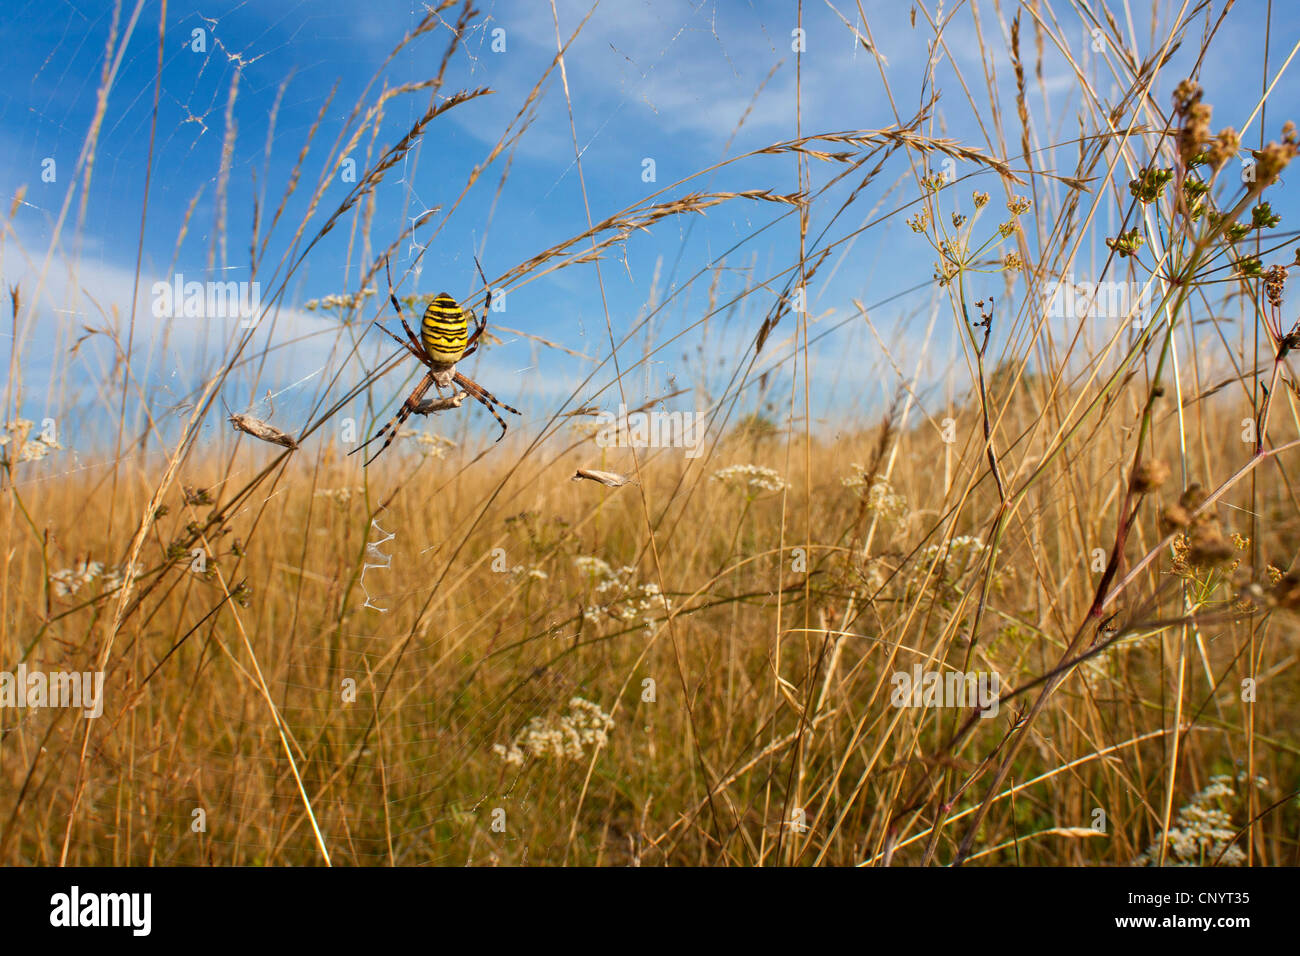 black-and-yellow argiope, black-and-yellow garden spider (Argiope bruennichi), sitting in the net in a meadow with prey, Germany, North Rhine-Westphalia Stock Photo